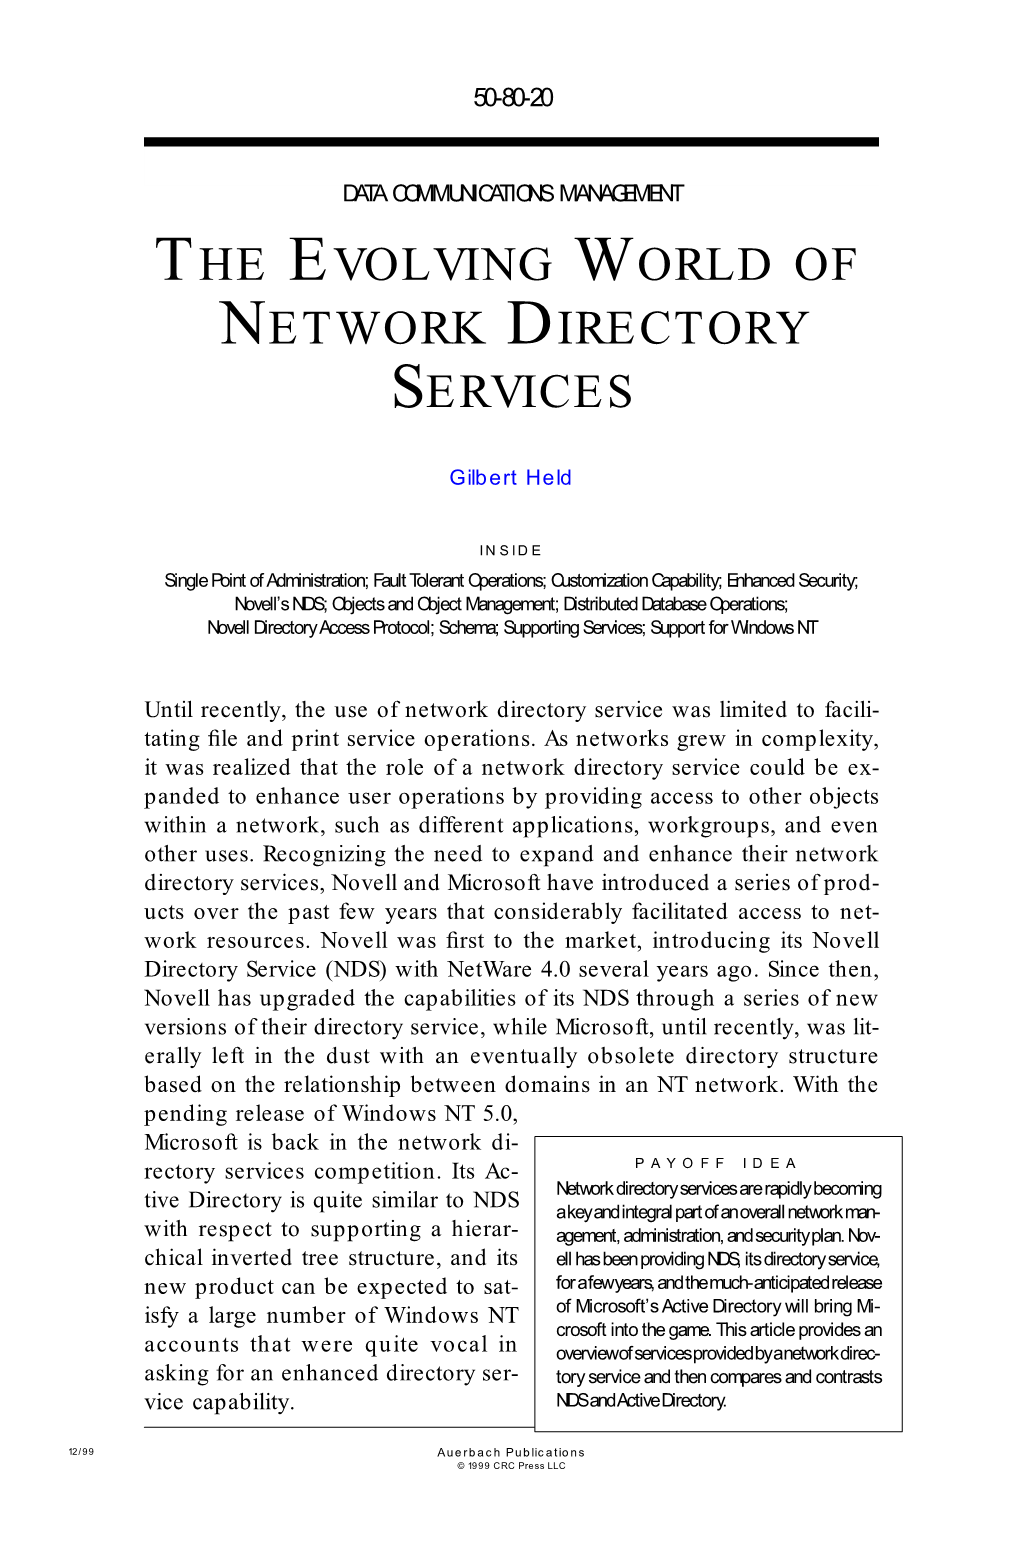 The Evolving World of Network Directory Services